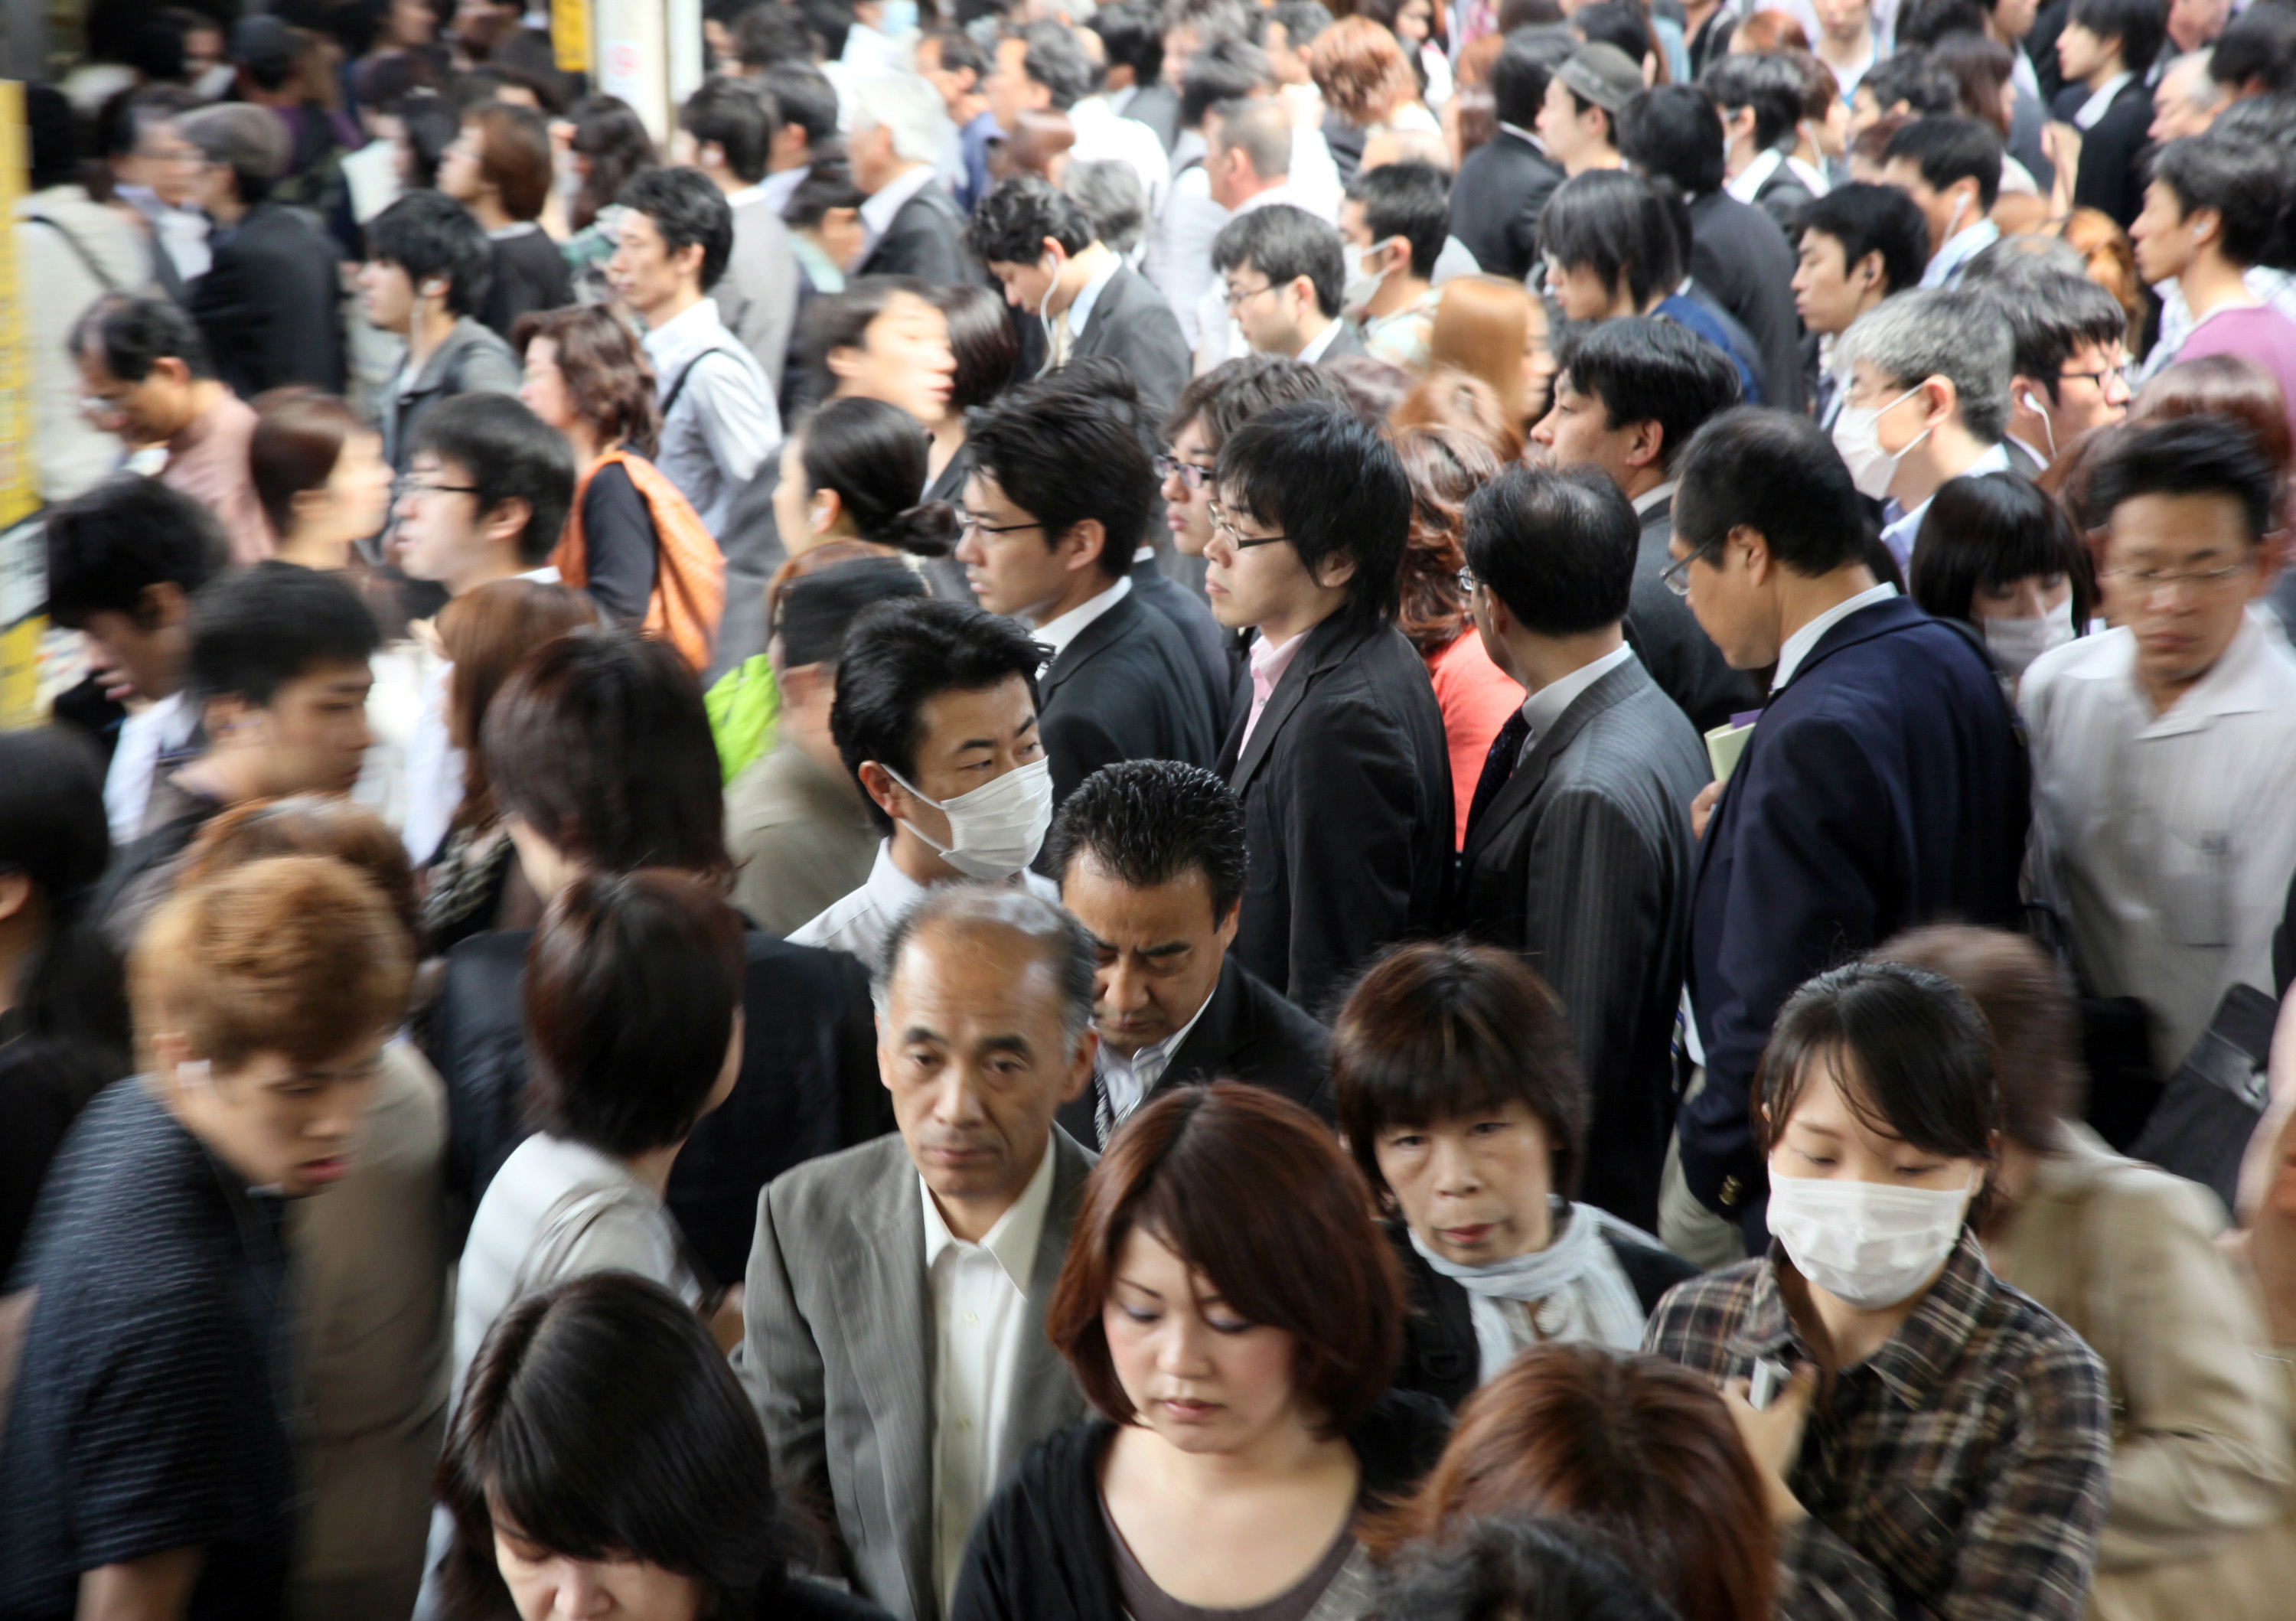 Commuters make their way slowly through a crowded train station in Tokyo in May 2011. | BLOOMBERG